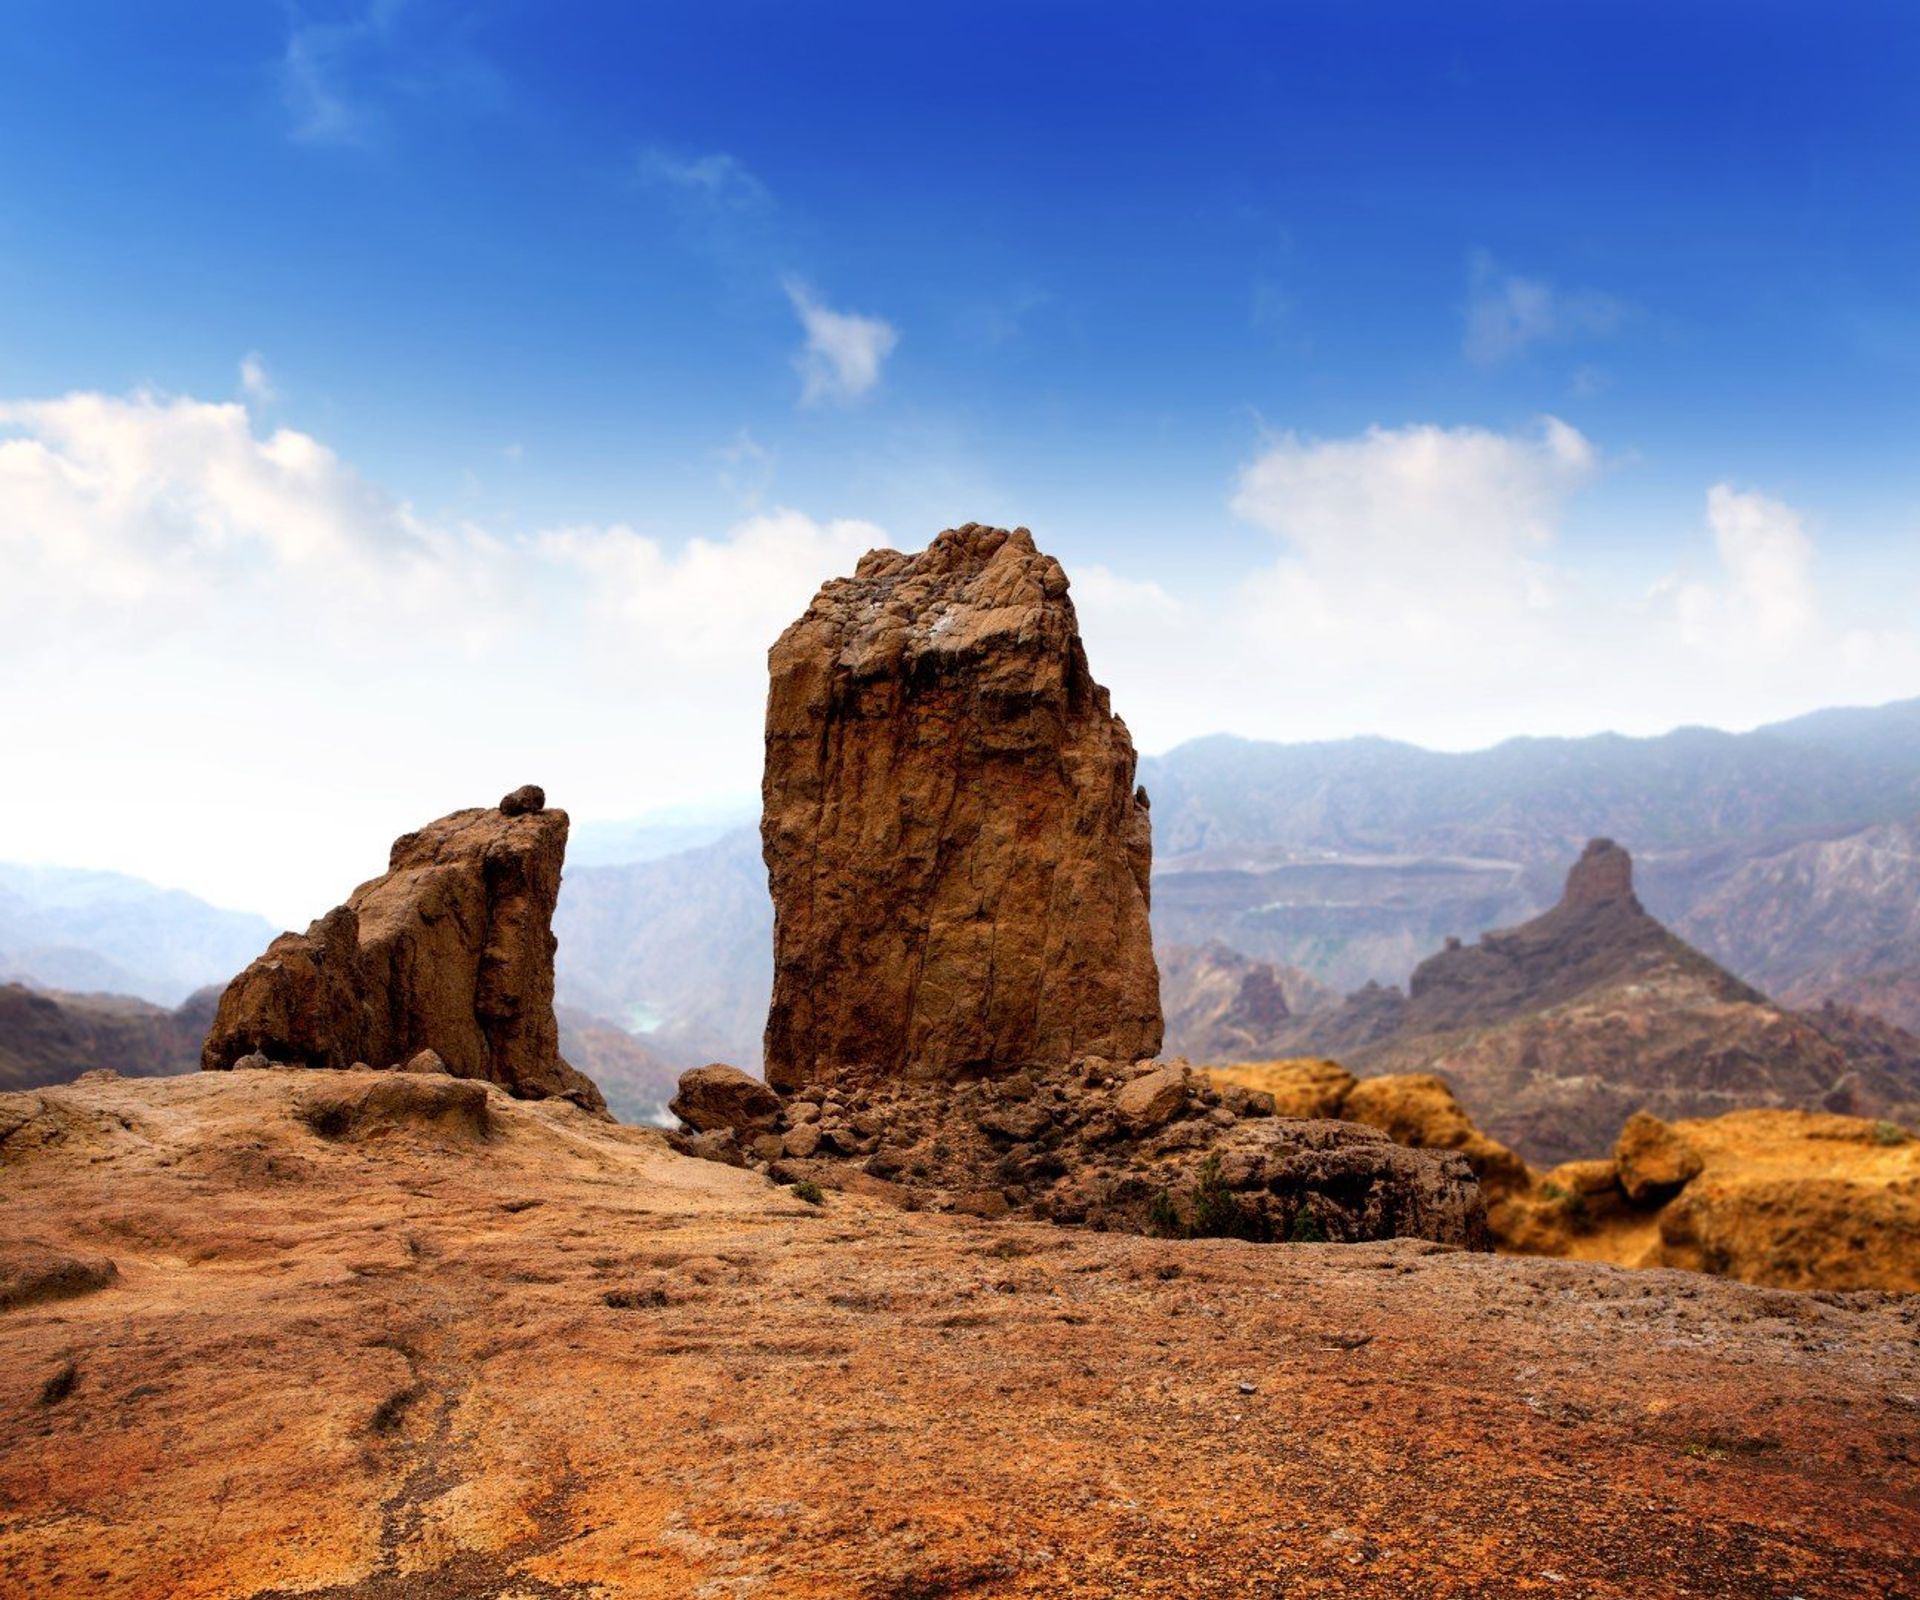 Volcanic Roque Nublo - a hiking and rock climbing challenge in central Gran Canaria